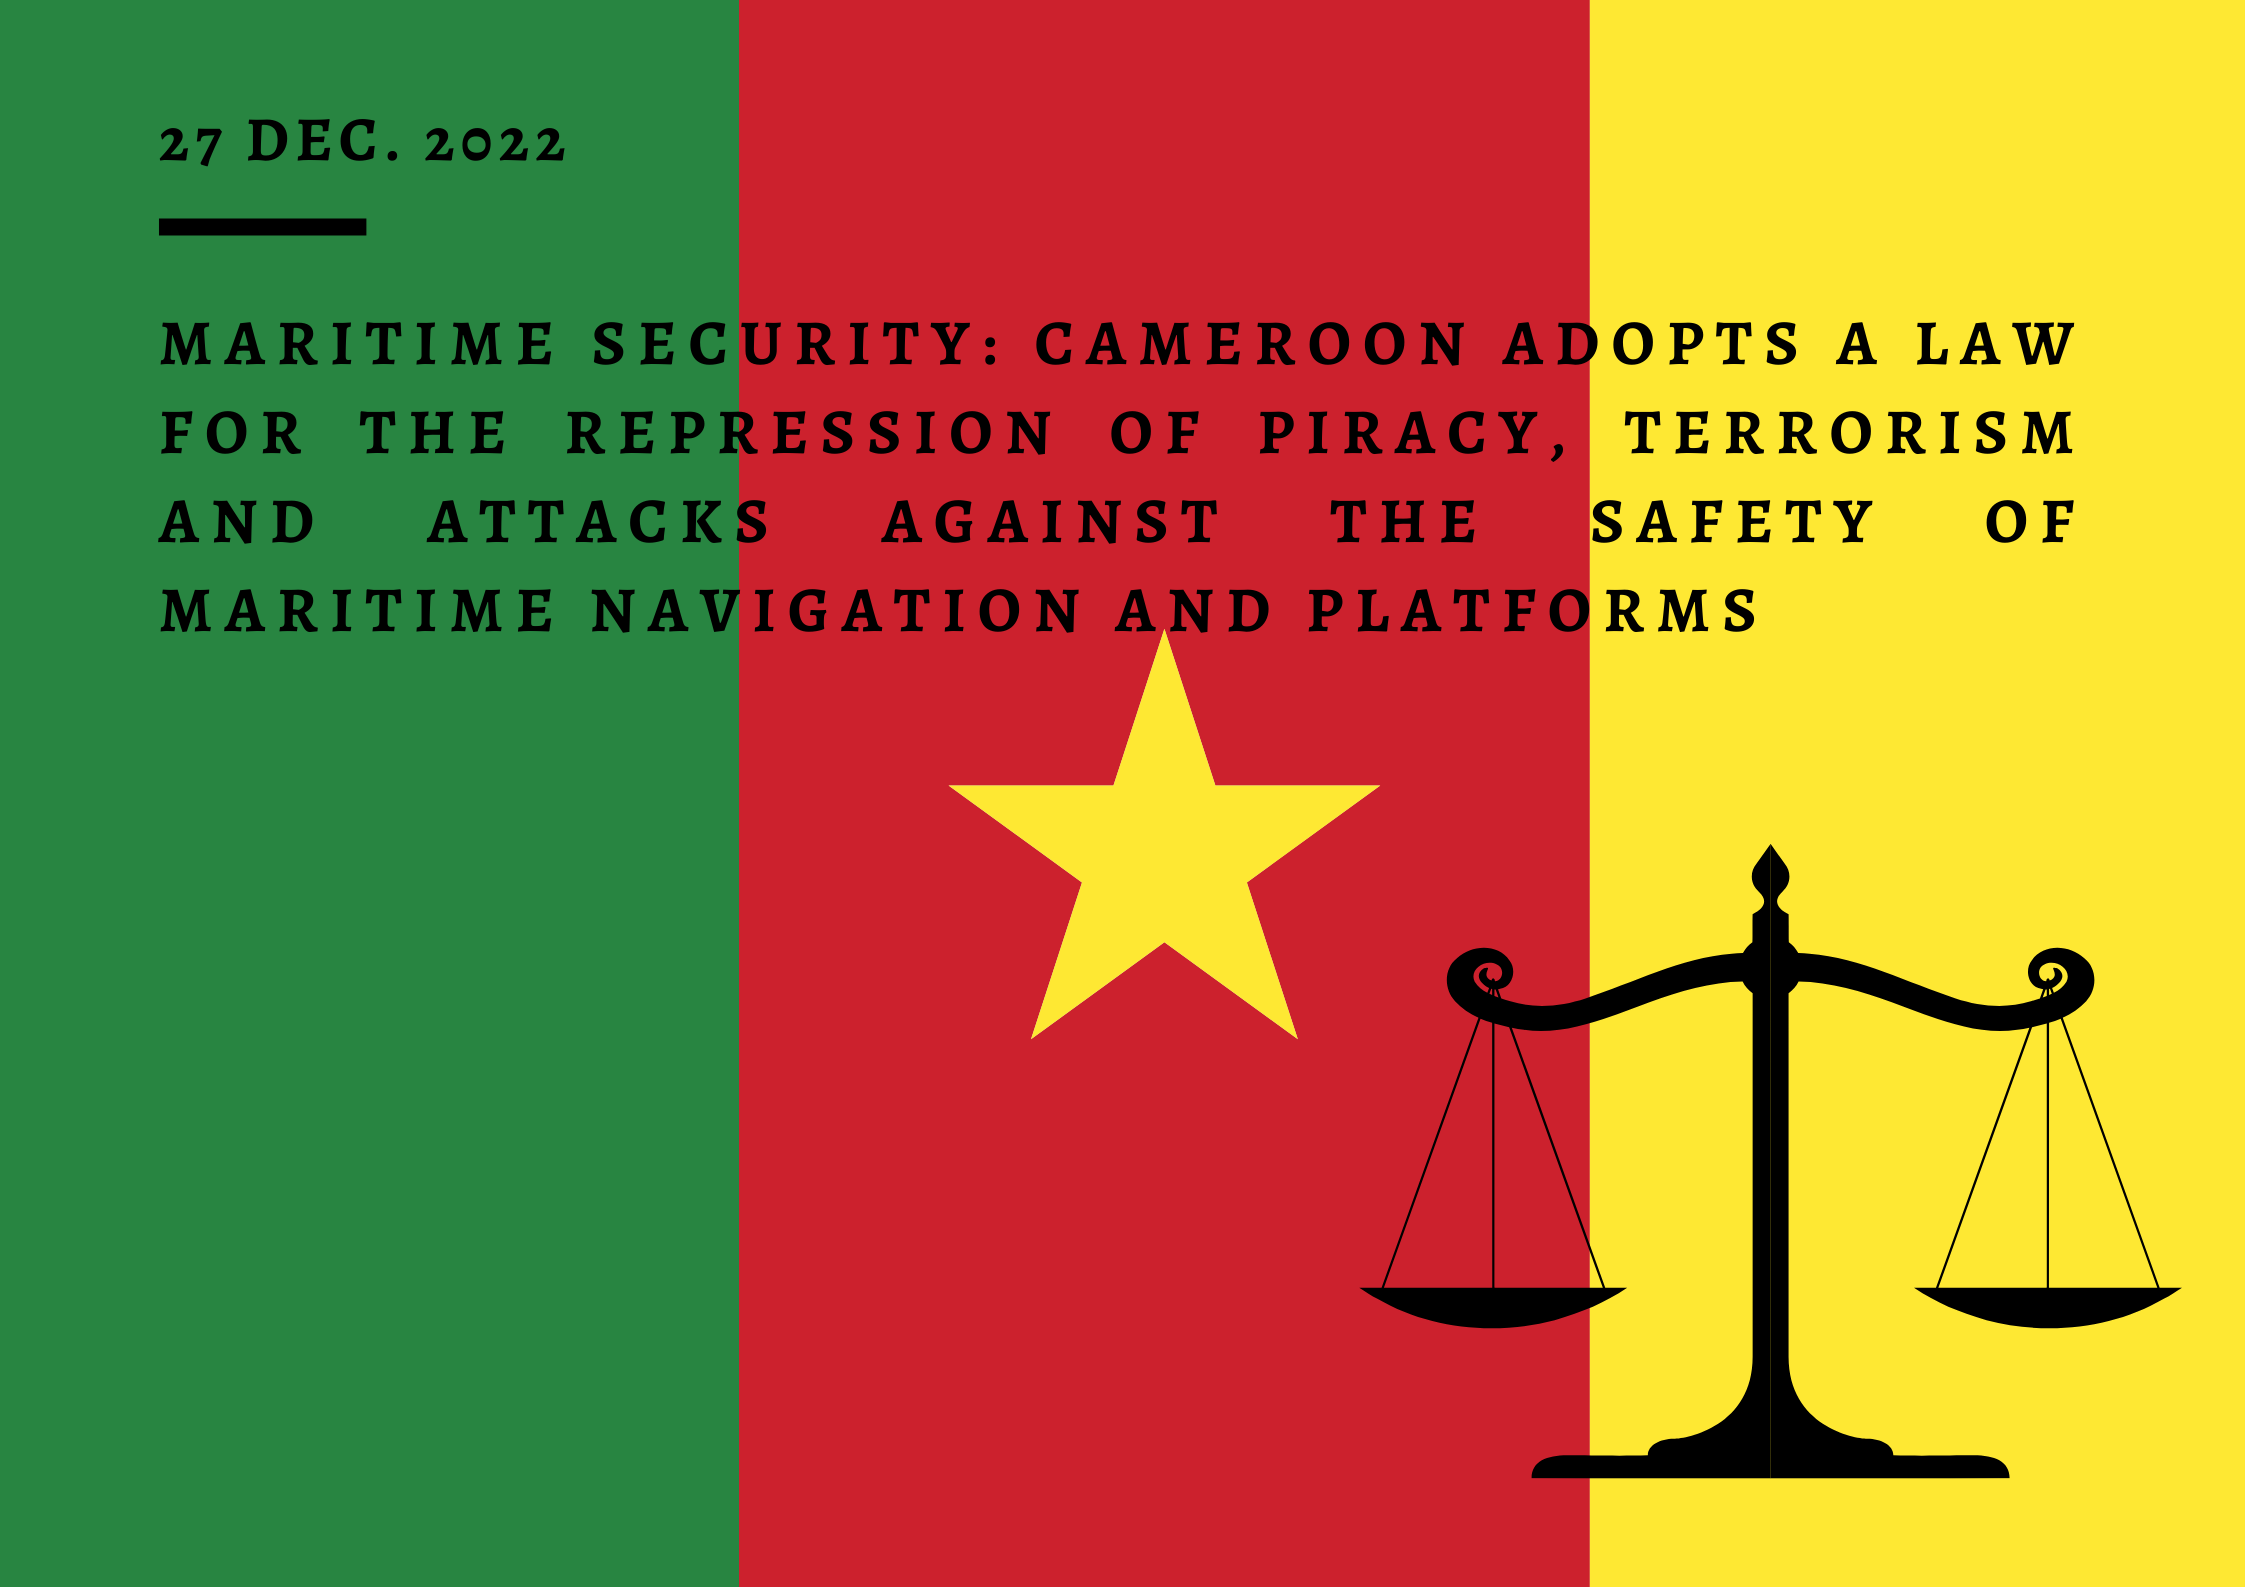 Maritime security: Cameroon adopts a law for the repression of piracy, terrorism and attacks against the safety of maritime navigation and platforms